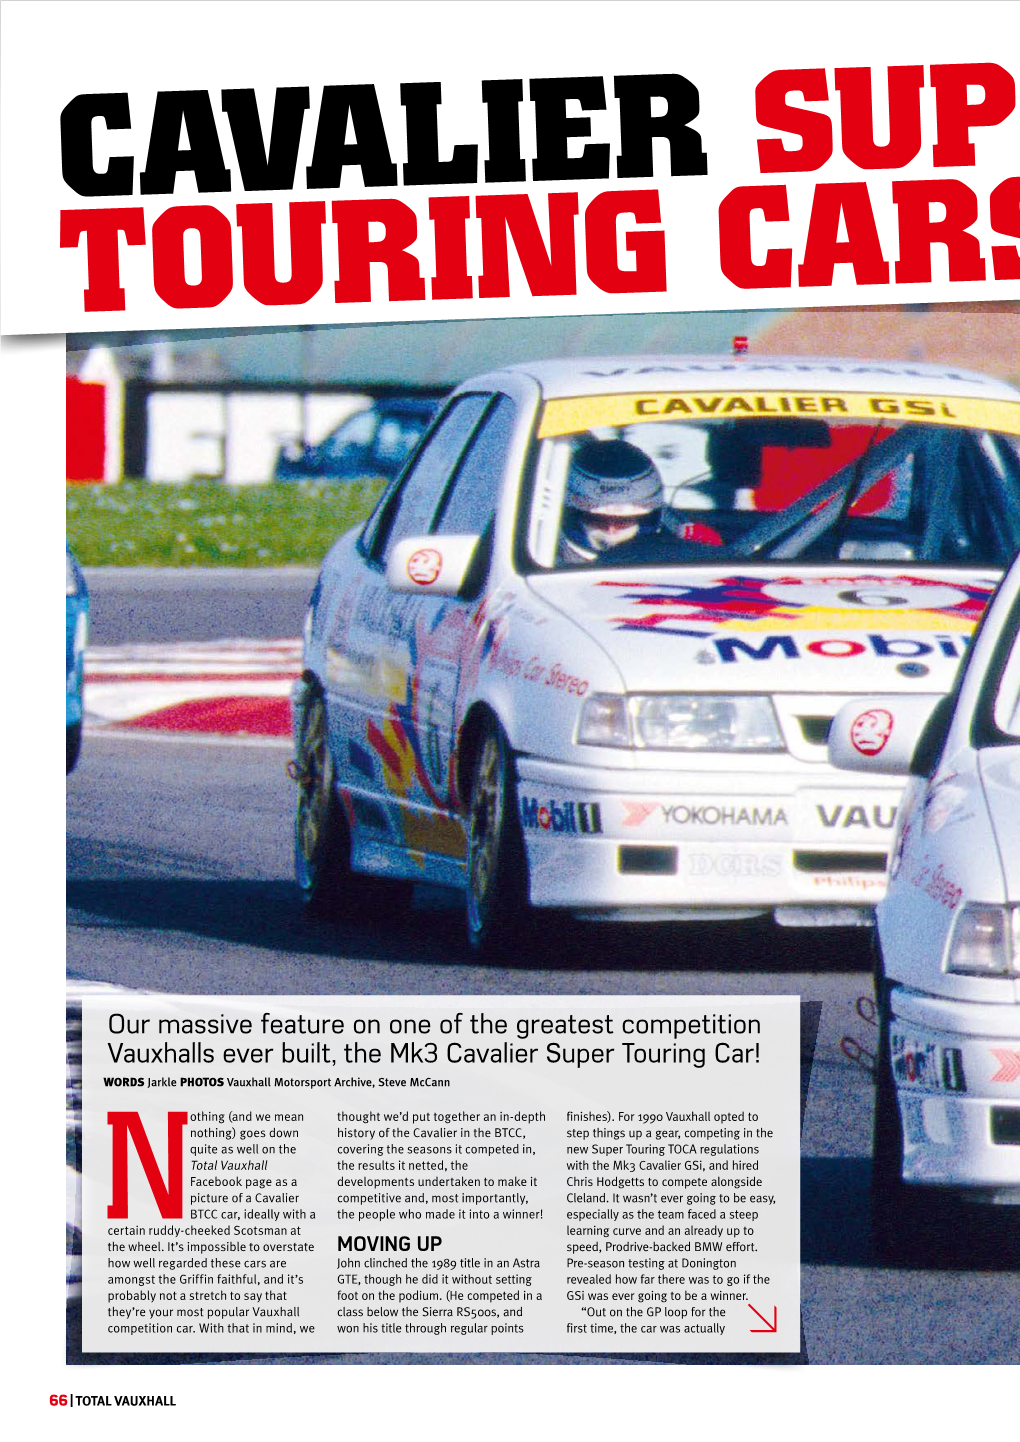 Cavalier Super Touring Cars Total Vauxhall